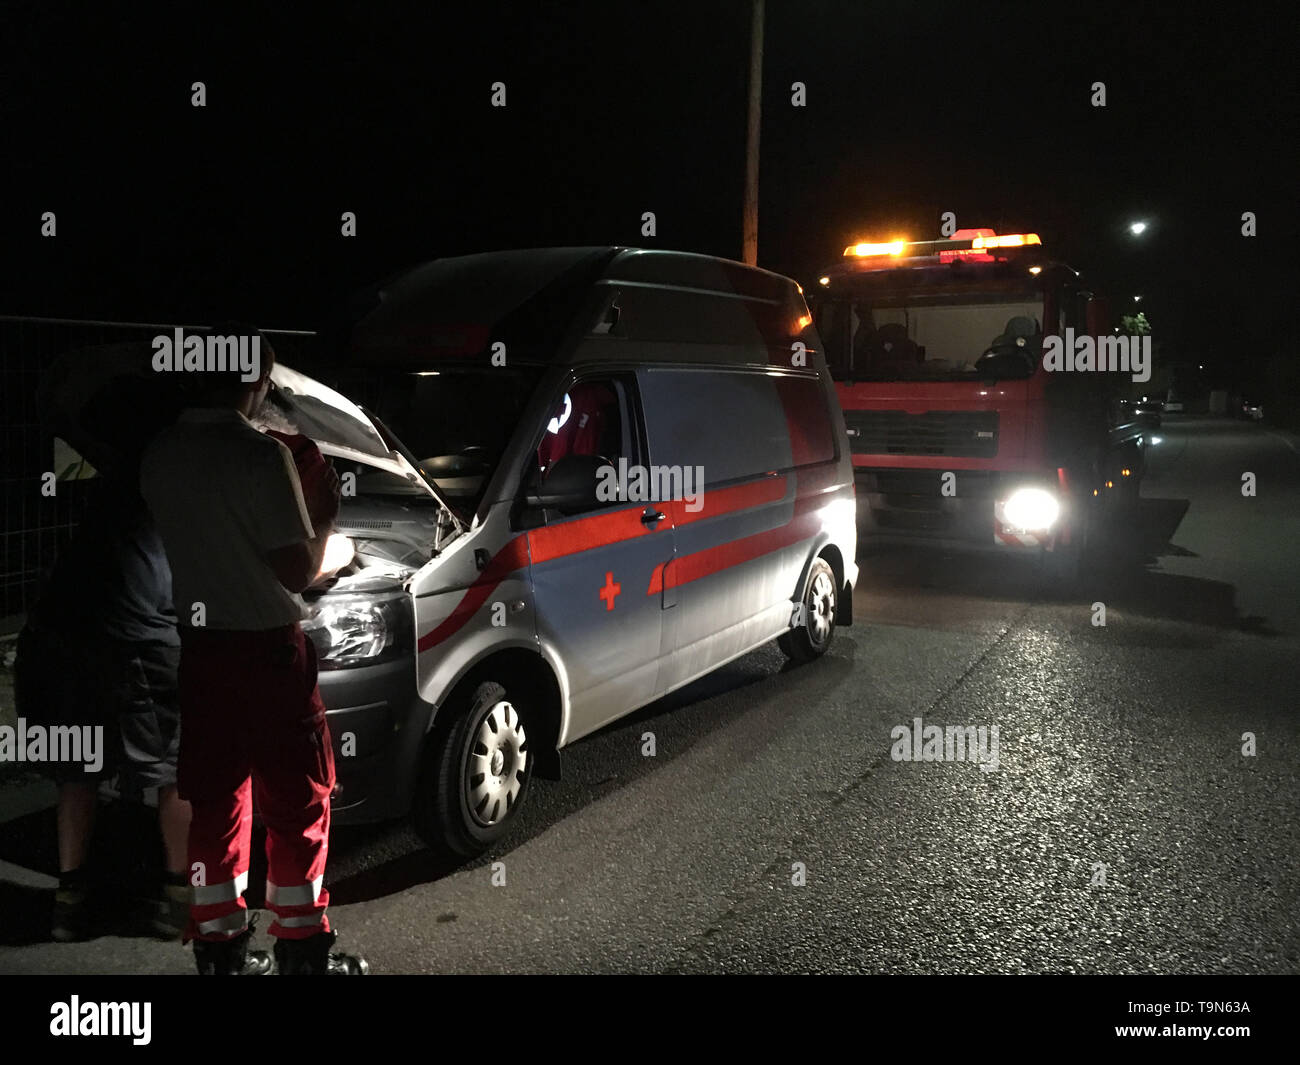 Ambulance with car problems during night Stock Photo